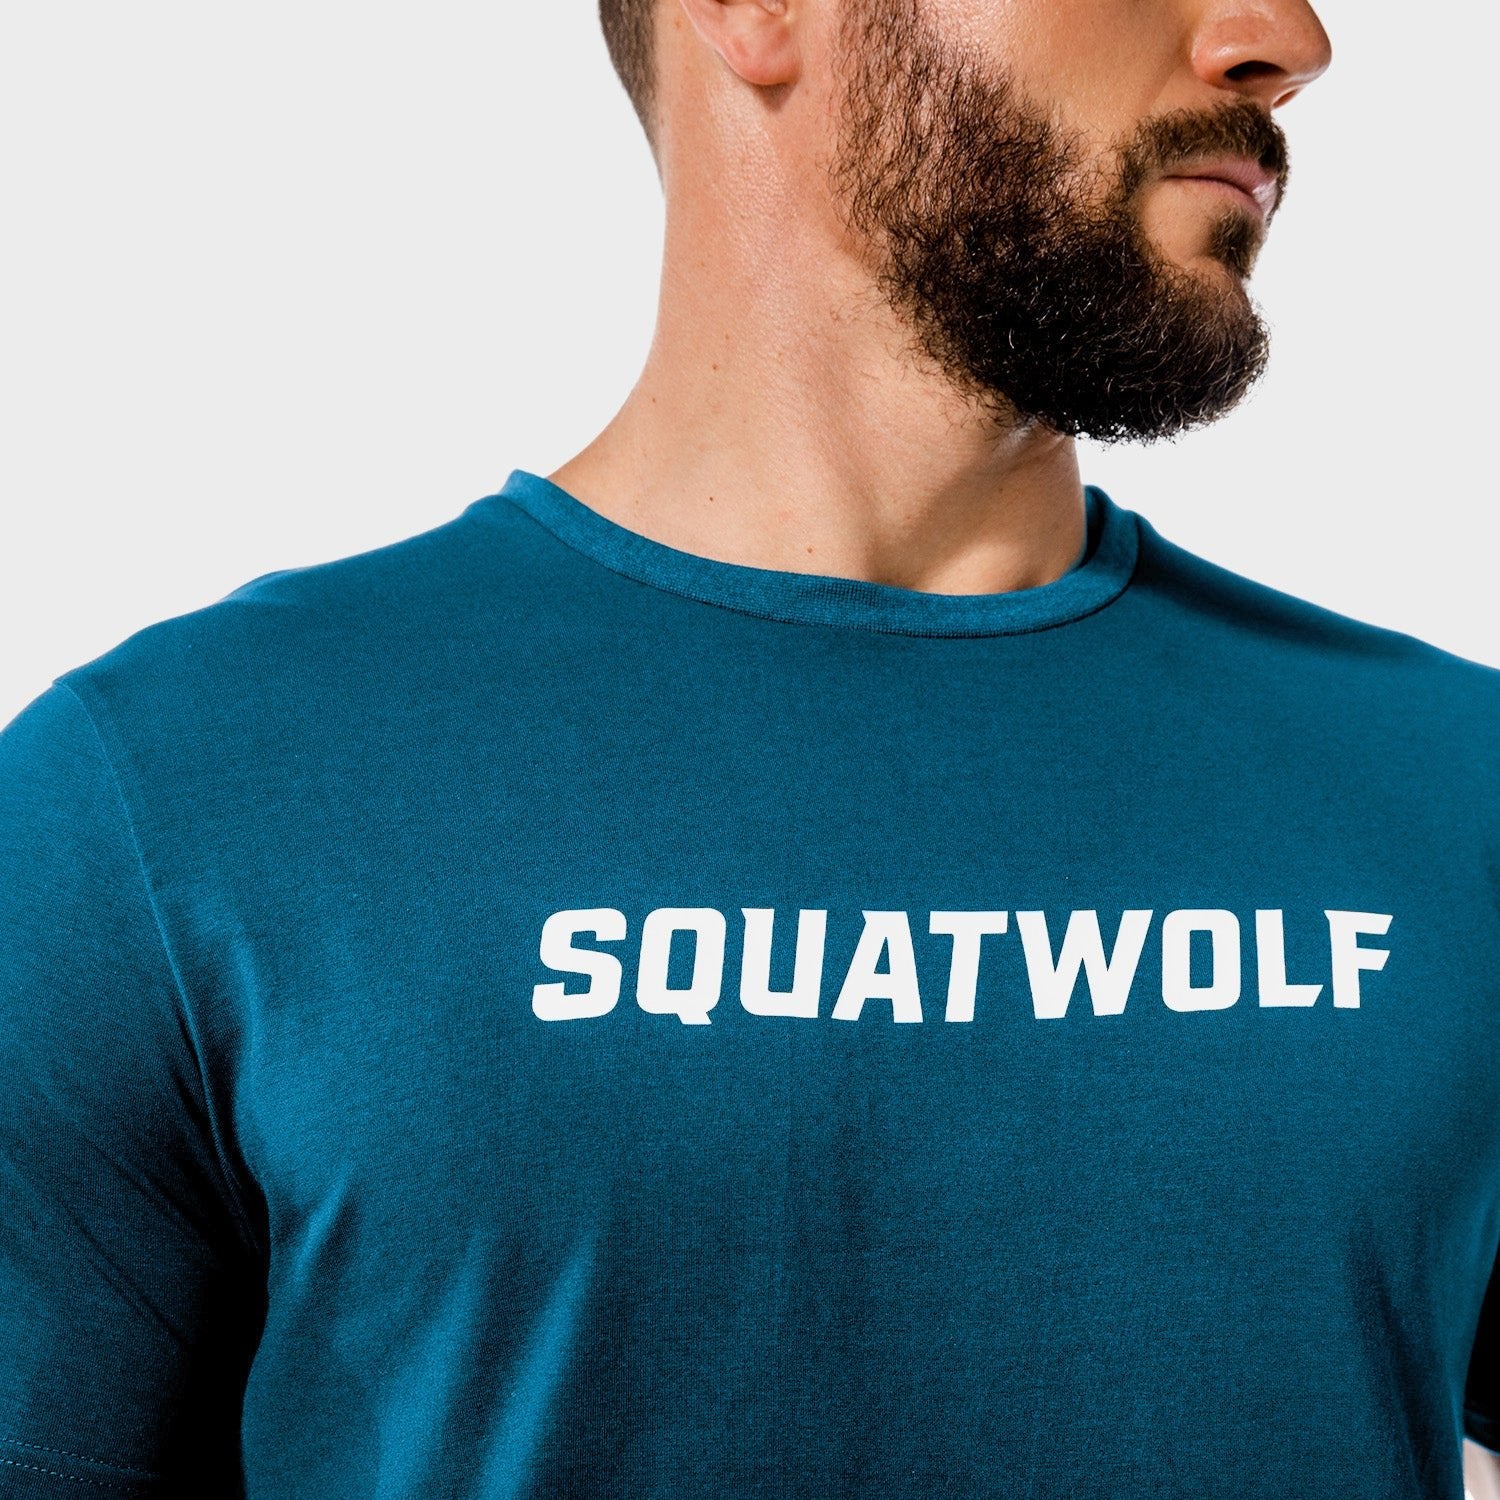 squatwolf-gym-wear-iconic-muscle-tee-blue-workout-shirts-for-men